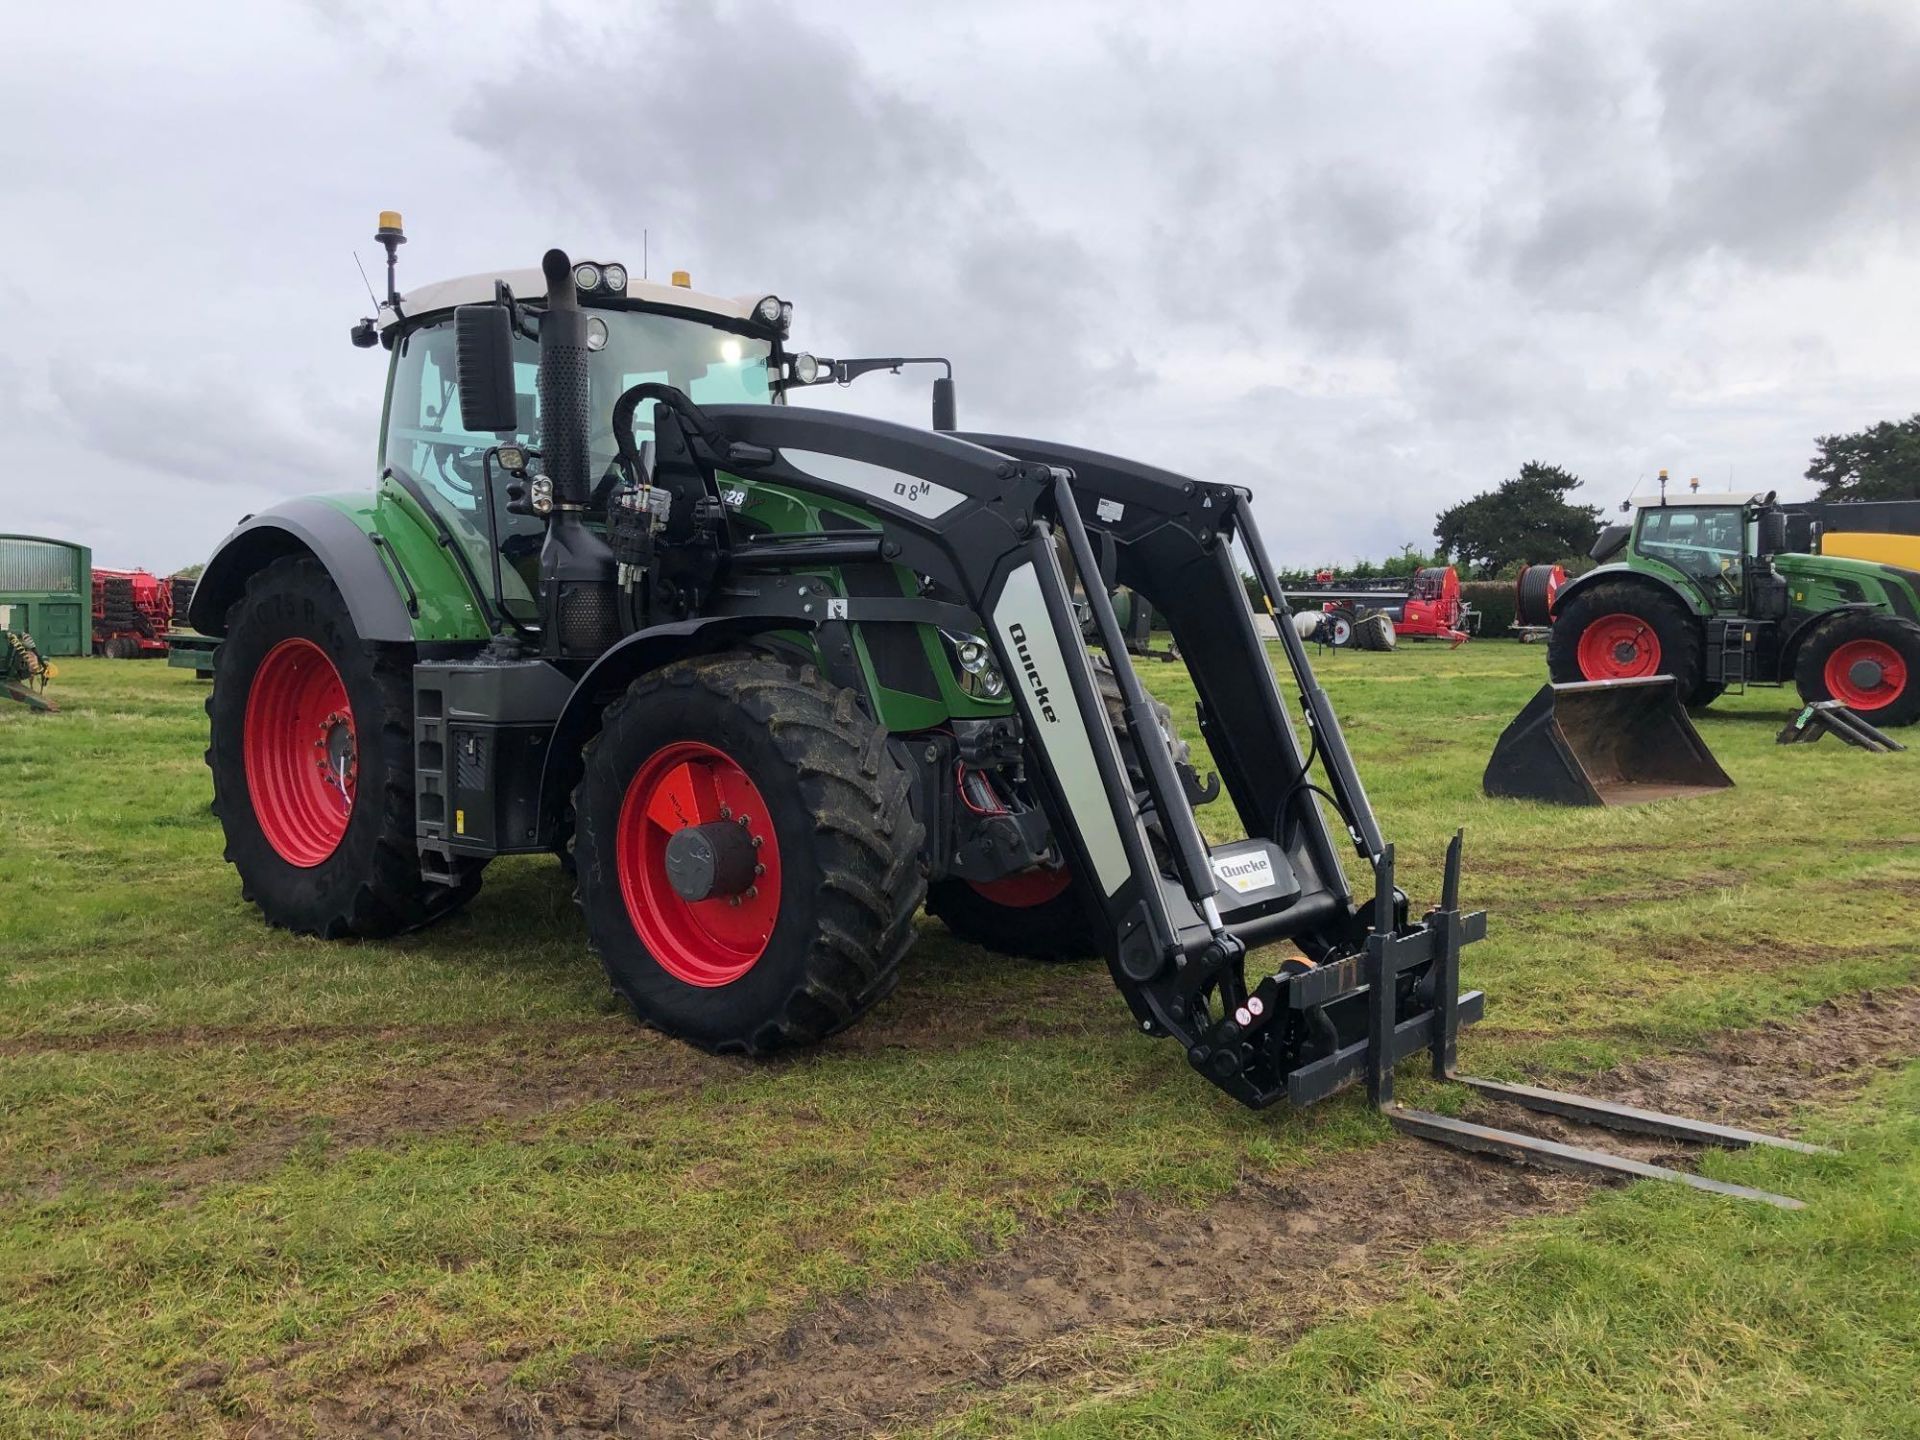 2018 Fendt 828 Vario Profi Plus 65kph 4wd tractor with Quicke Q8M front loader and pallet tines, fro - Image 9 of 29